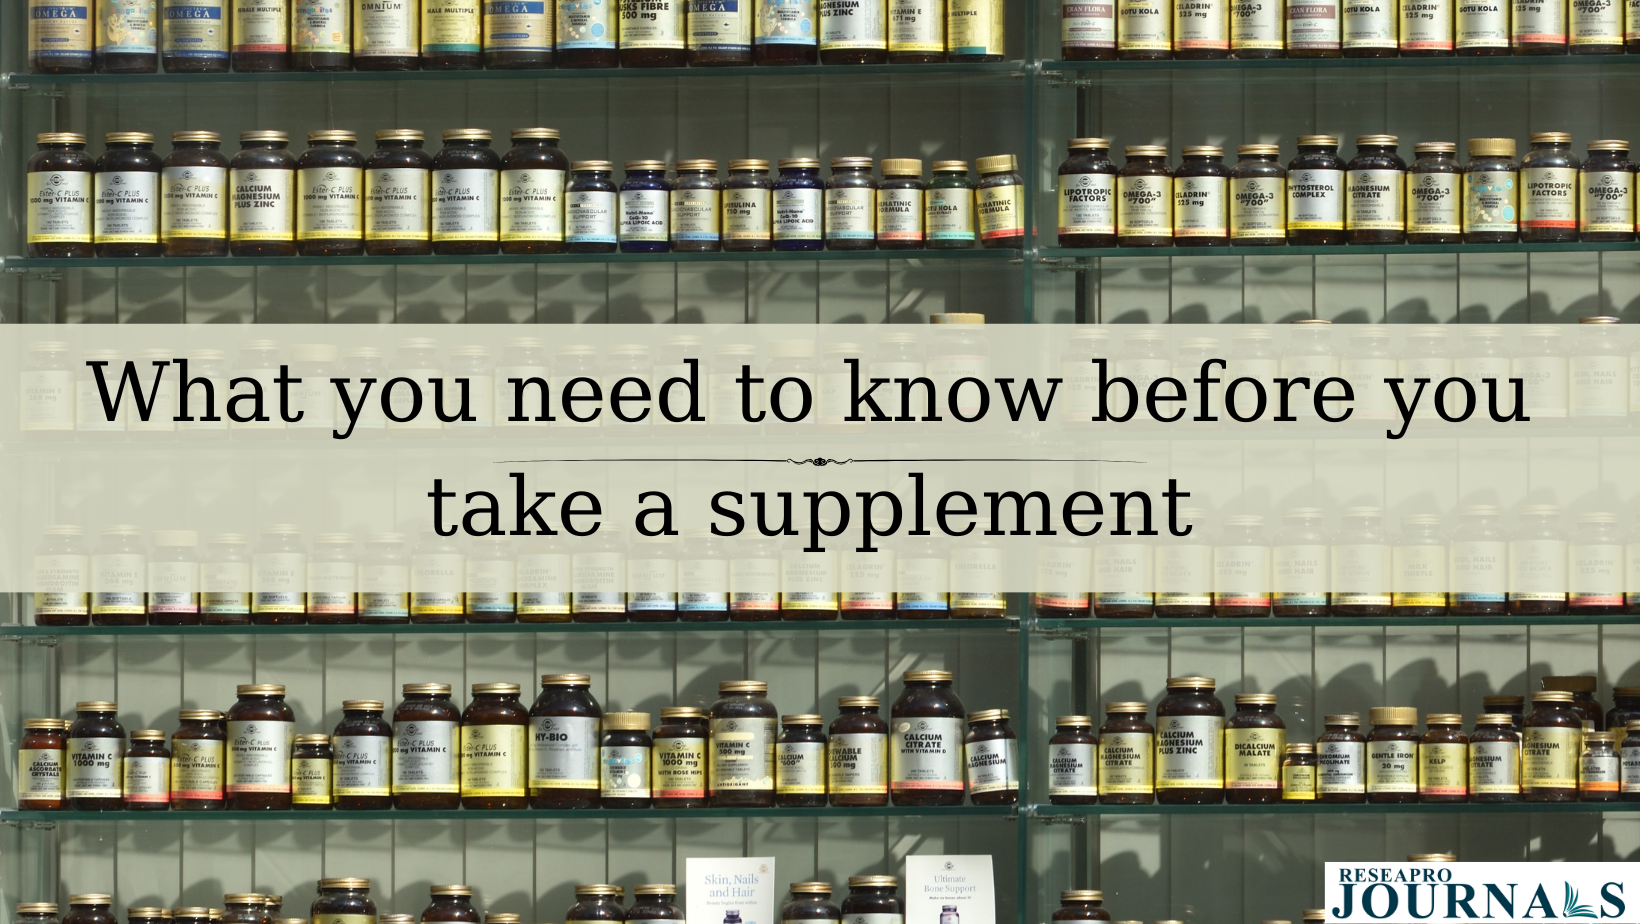 What you need to know before you take a supplement